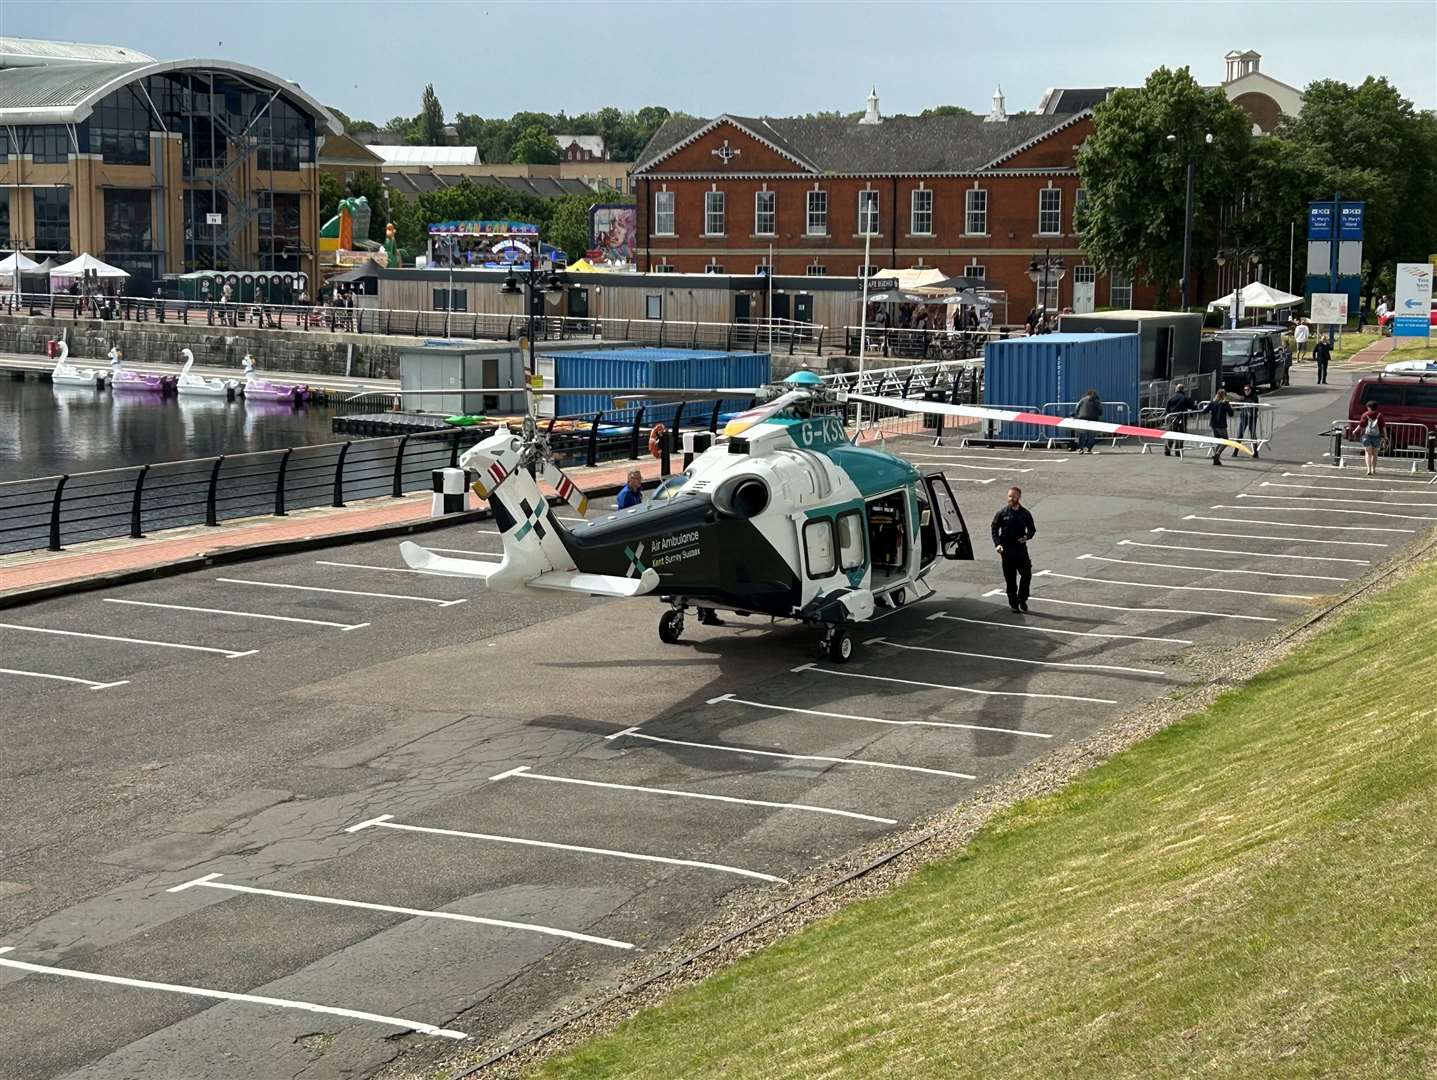 The air ambulance landed nearby. Picture: Brad Harper